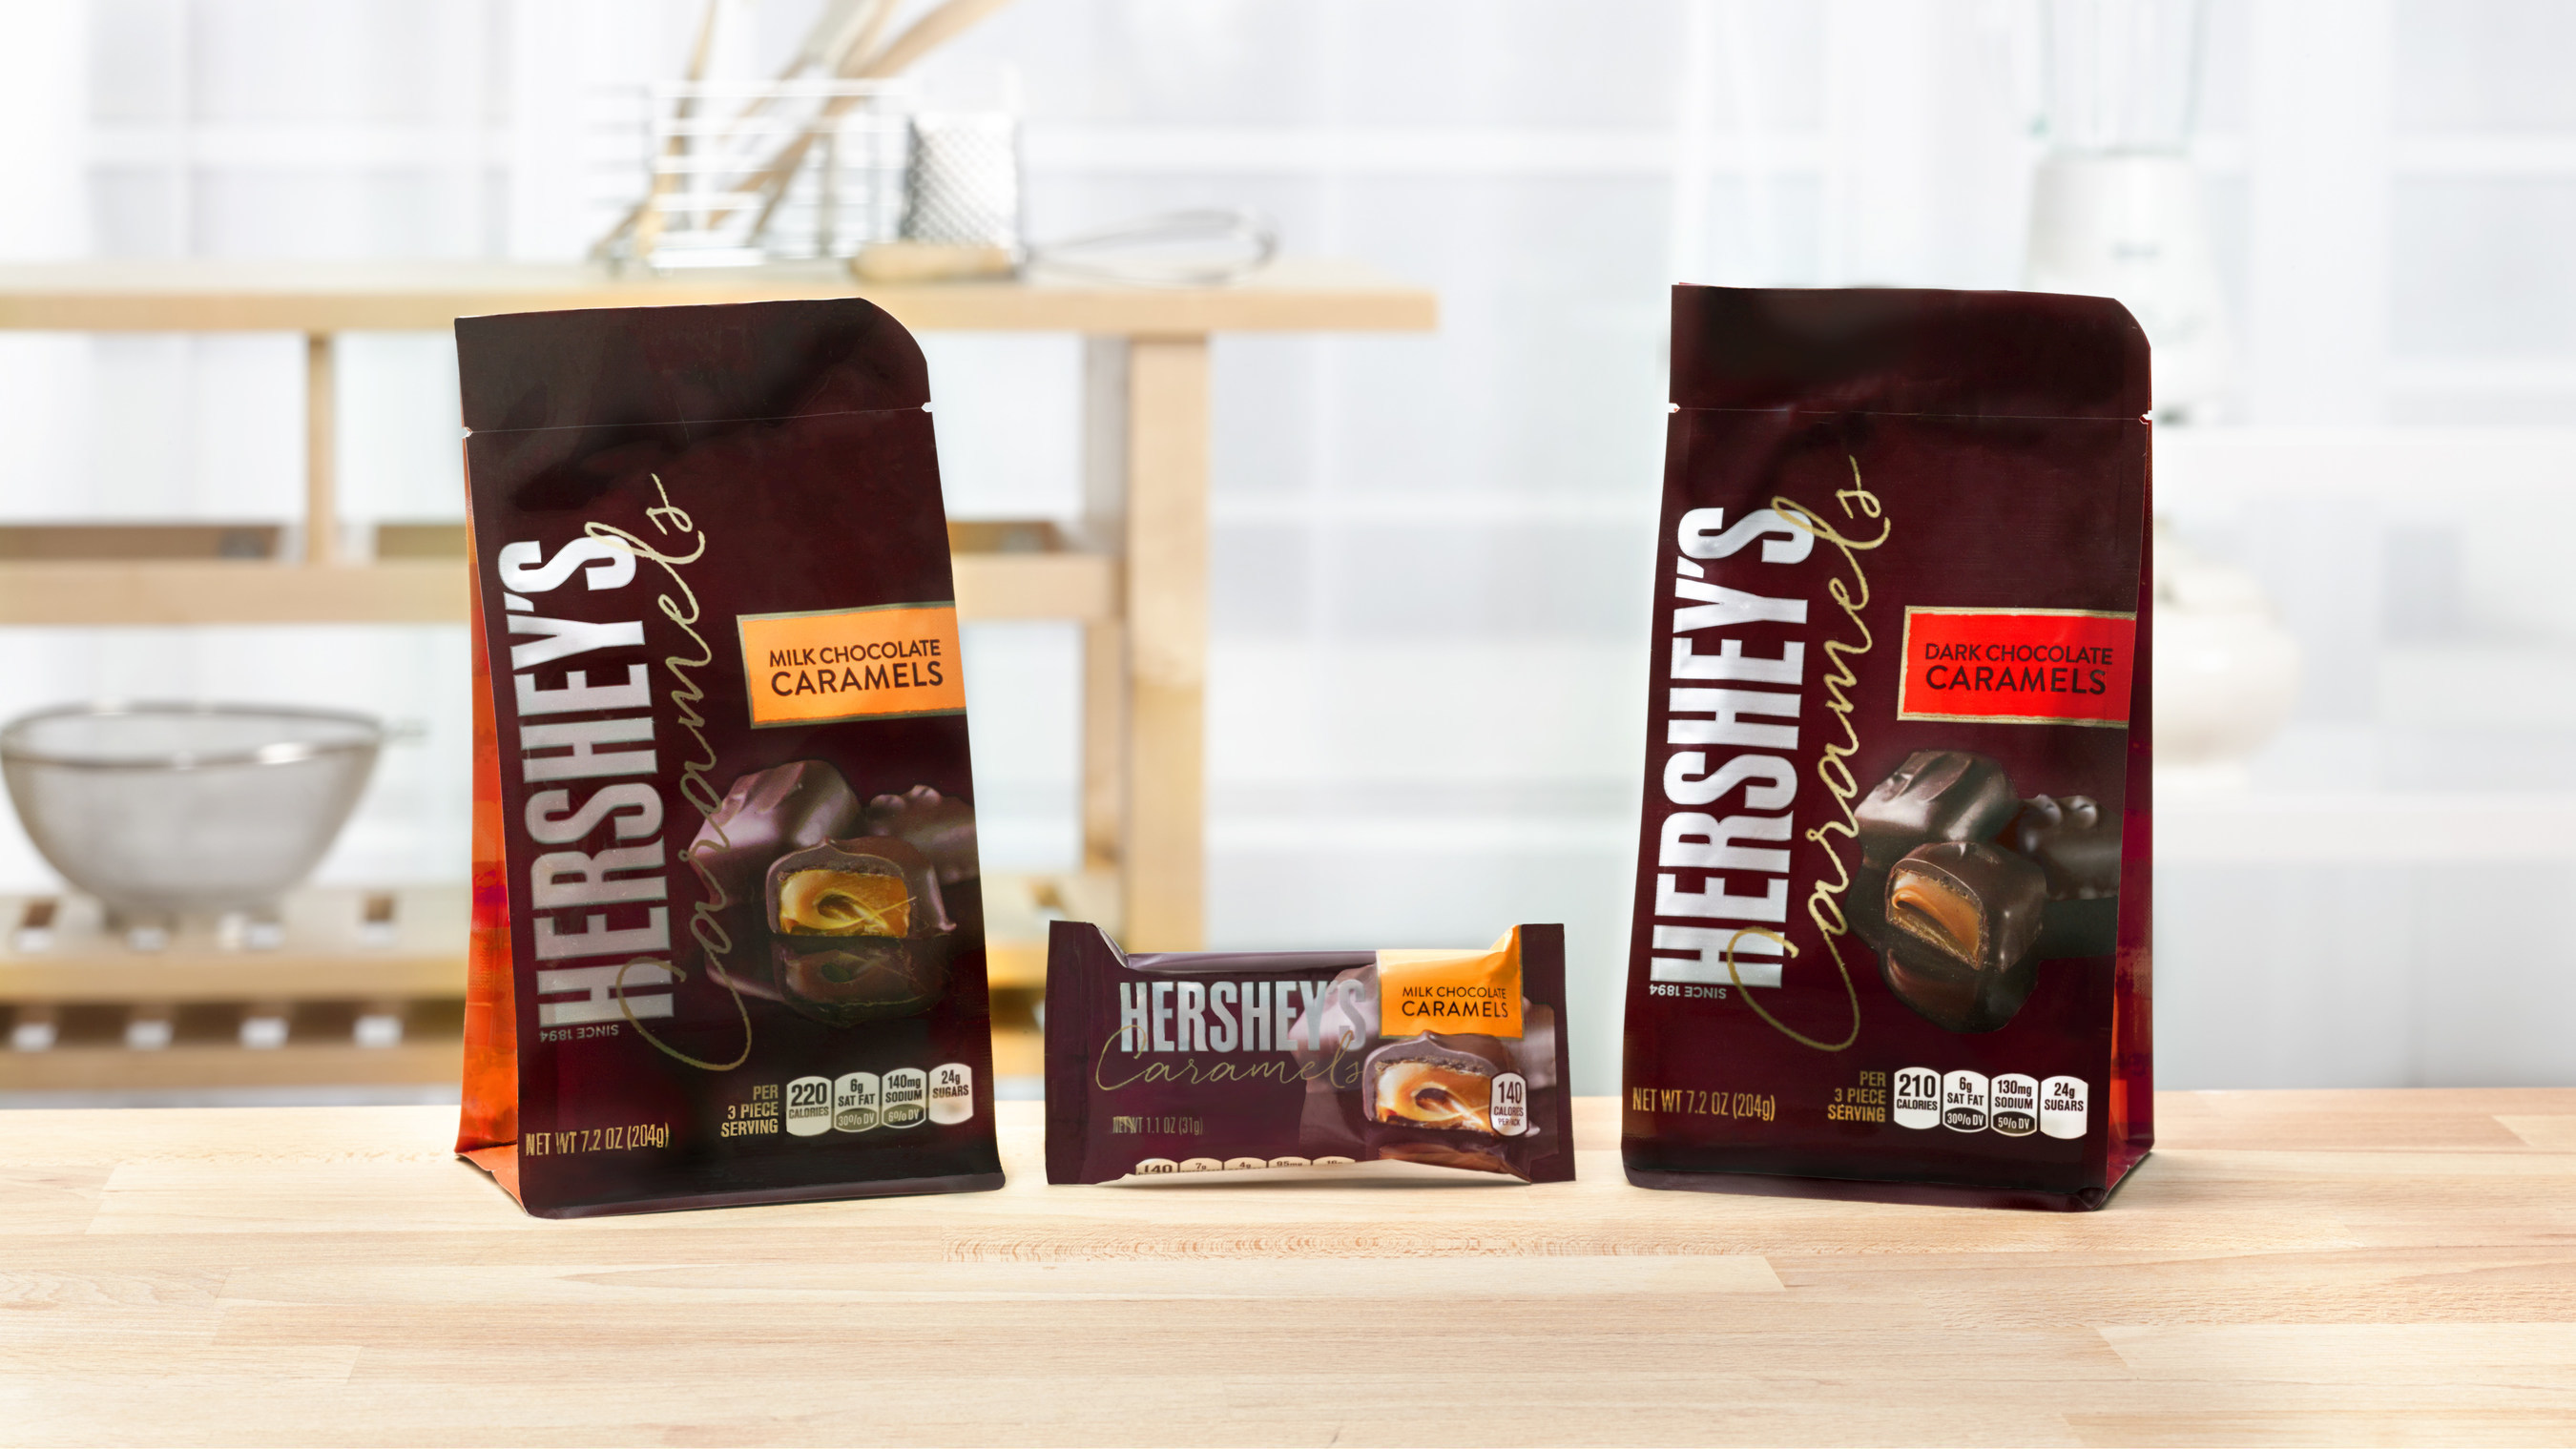 Individually wrapped in milk chocolate or dark chocolate varieties, HERSHEY'S Caramels are now available in a 7.2 ounce stand up pouch at mass, grocery, drug and specialty retailers nationwide. HERSHEY'S Caramels in milk chocolate are also available in a 1.1 ounce bar.